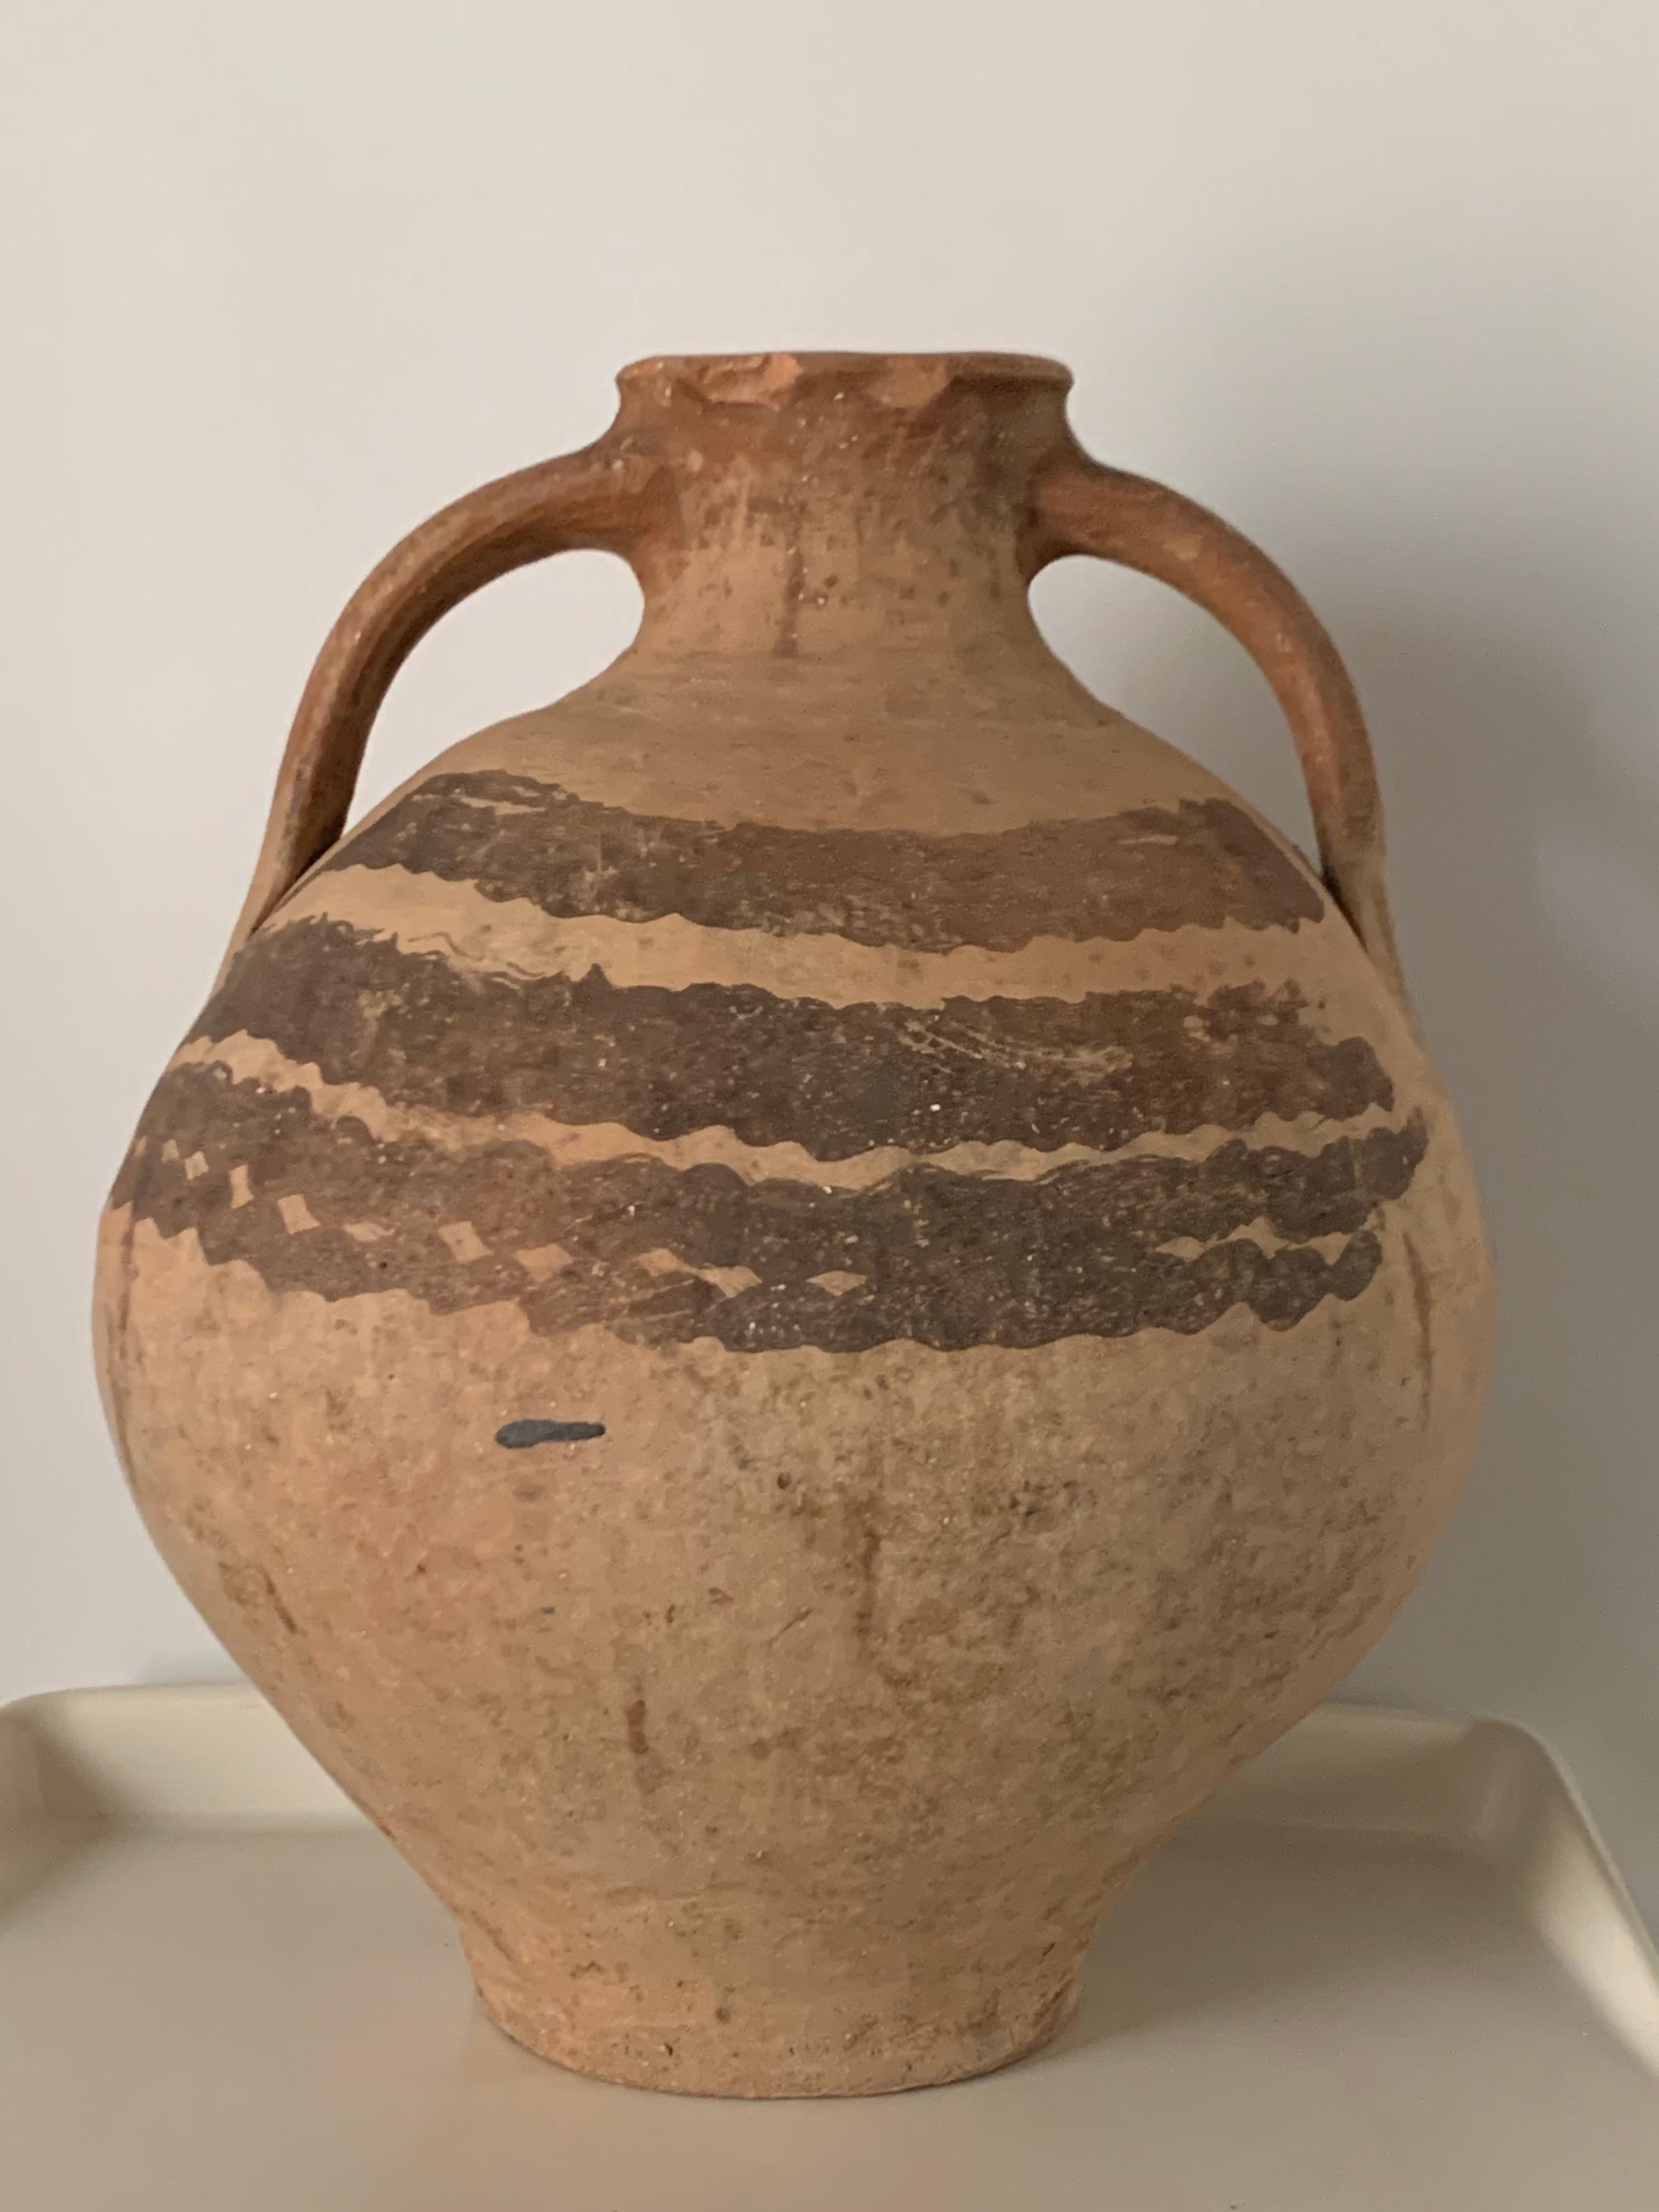 Pitcher ‘cantaro’ from Calanda, Aragon-Zaragoza area of Spain. A rare piece from a Private collection, circa 1750. Other examples can be seen in the Museo de Zaragoza.
With gorgeous original patina, this jar features the characteristic